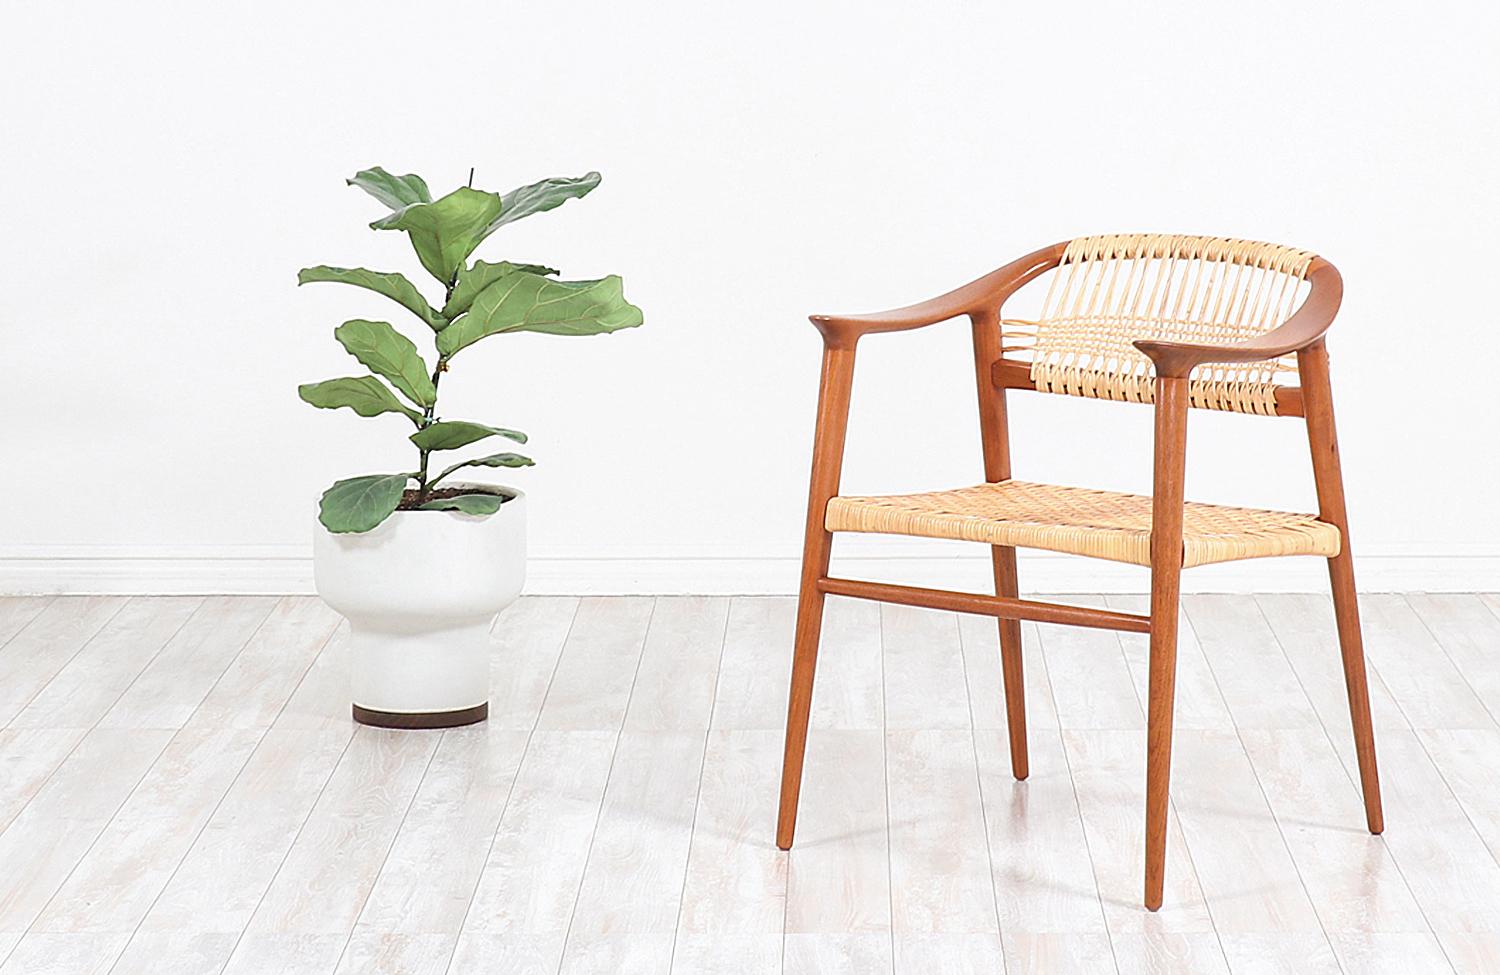 Classic modern Bambi armchair designed by Rolf Rastad and Adolf Relling for Gustav Bahus in Norway circa1950s. This iconic Bambi design is exceptionally crafted in teak wood with long and slender tapered legs and clean curved lines for a Classic